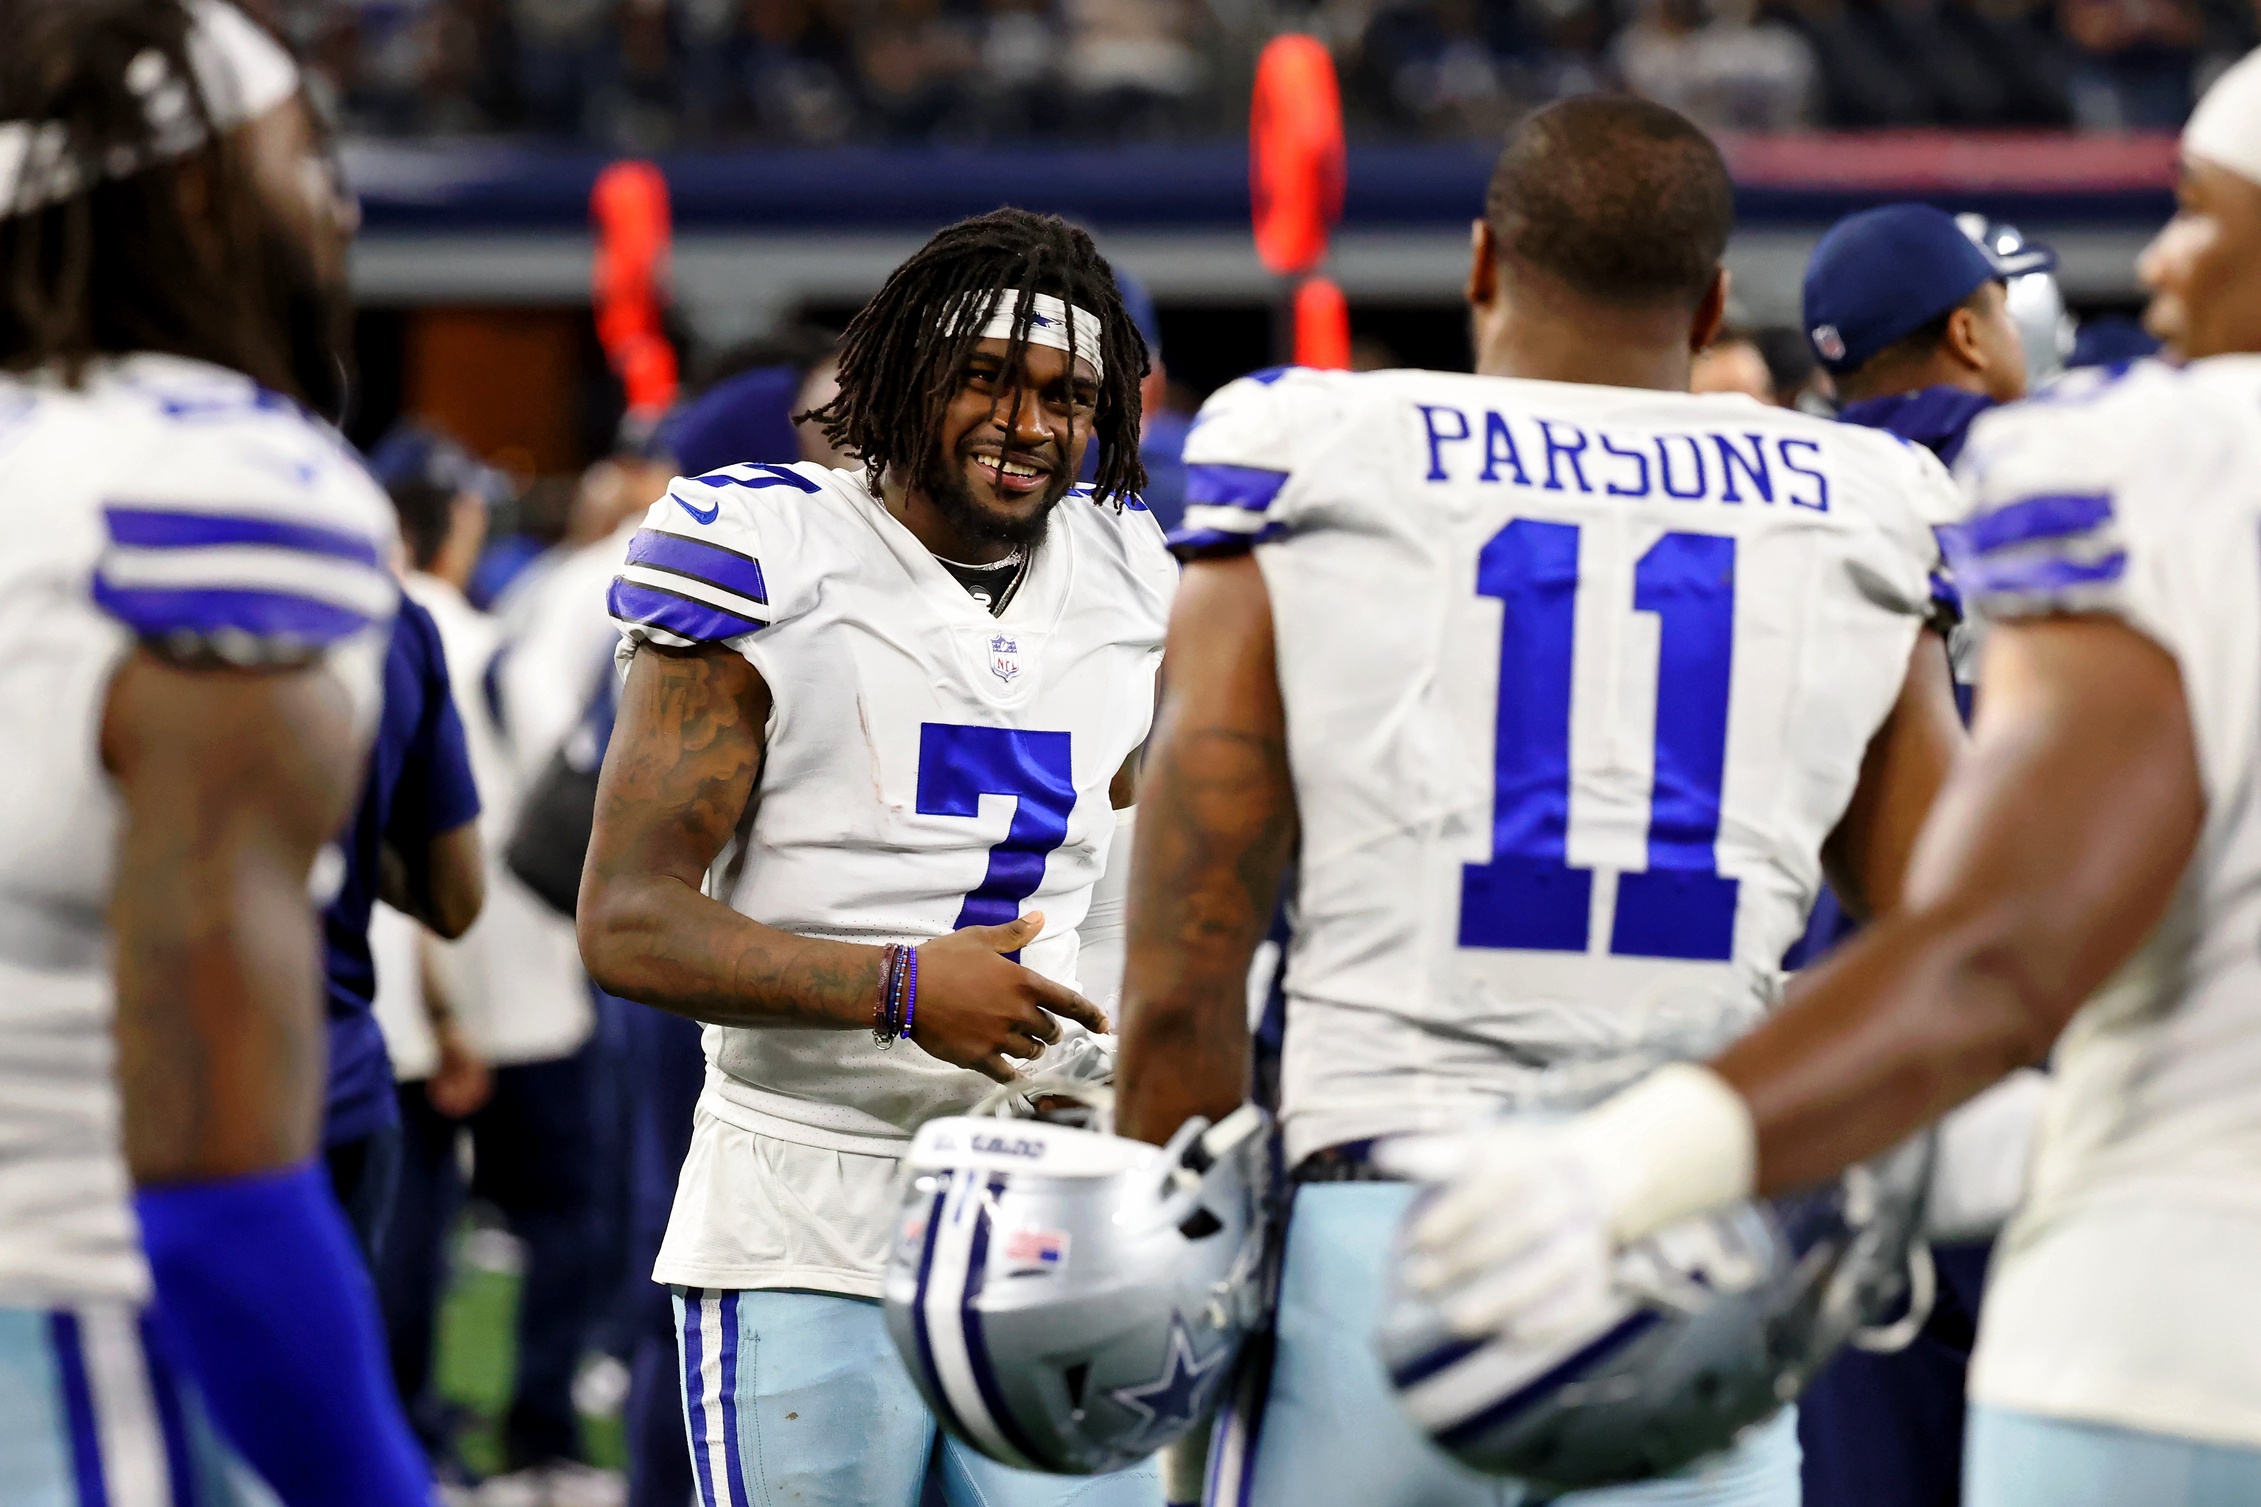 Sep 27, 2021; Arlington, Texas, USA; Dallas Cowboys cornerback Trevon Diggs (7) smiles while talking with linebacker Micah Parsons (11) on the sideline during the fourth quarter of their game against the Philadelphia Eagles at AT&amp;T Stadium. Mandatory Credit: Kevin Jairaj-USA TODAY Sports